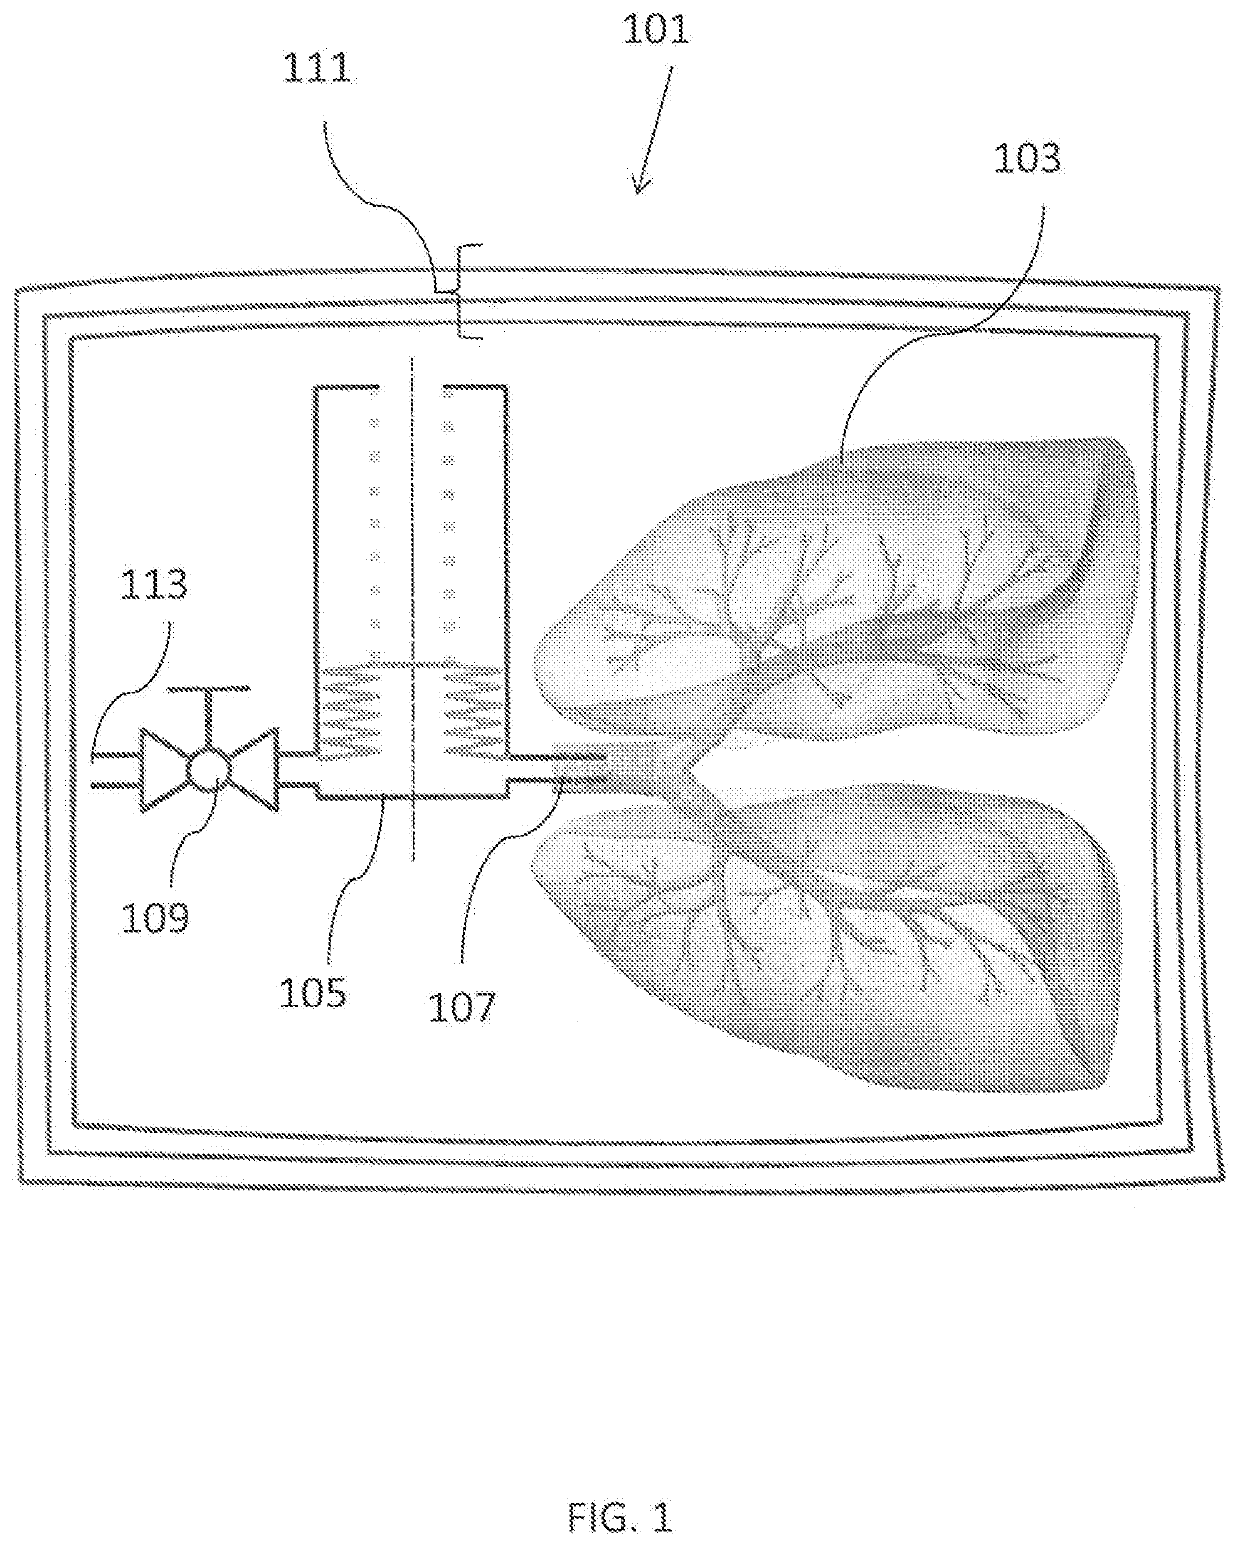 Apparatus for tissue transport and preservation